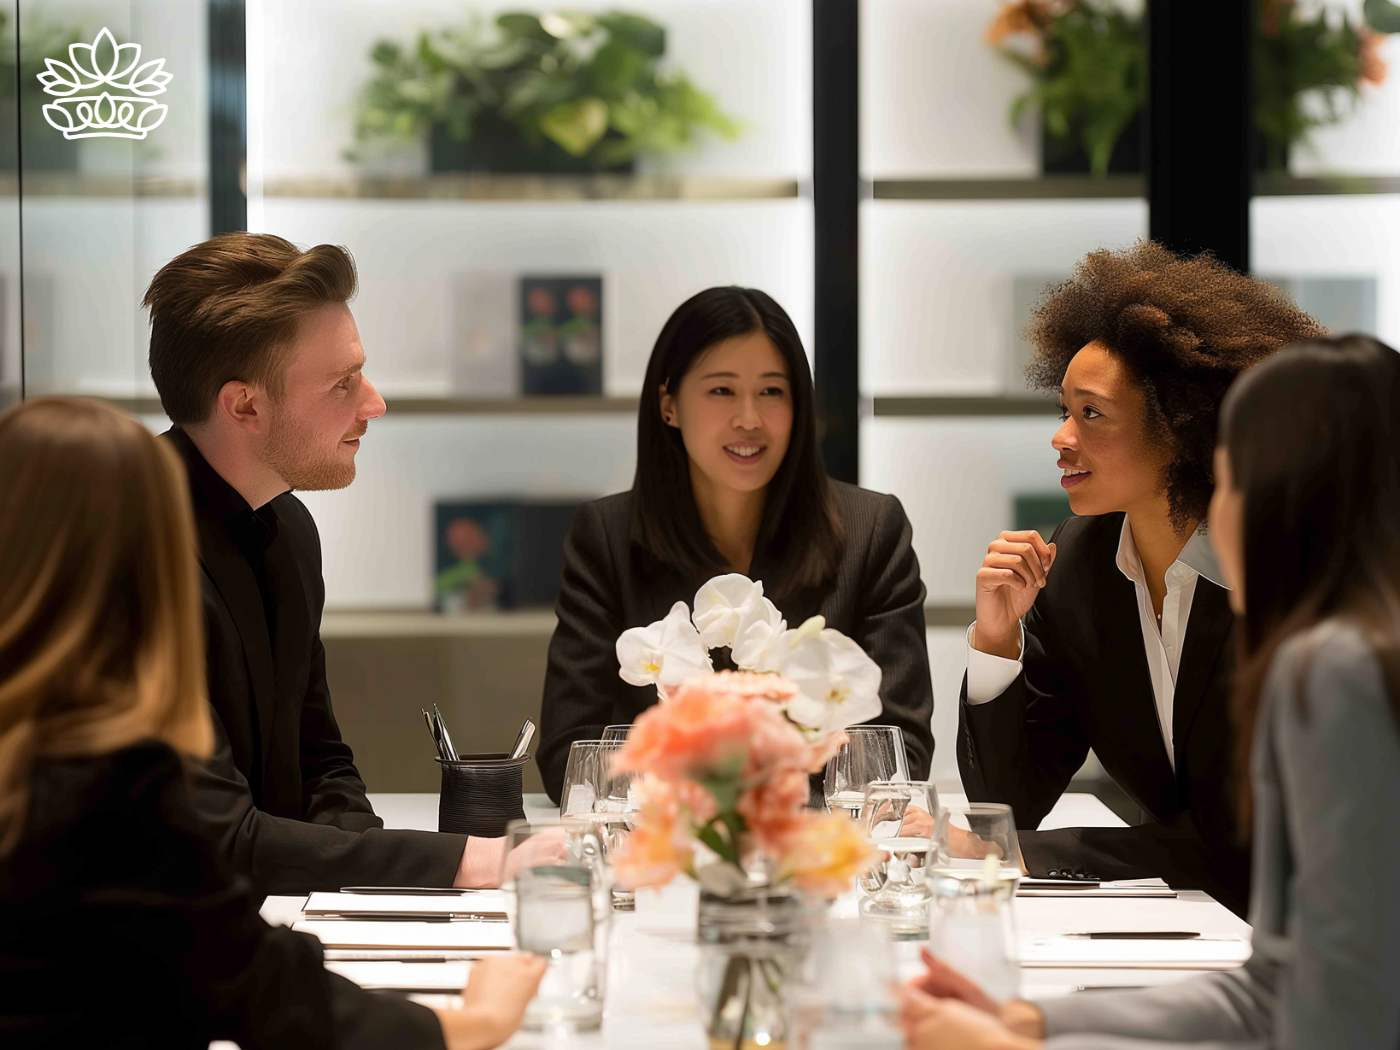 Diverse professionals engaging in a discussion around a meeting table adorned with delicate peach flowers, adding a touch of elegance by Fabulous Flowers and Gifts.